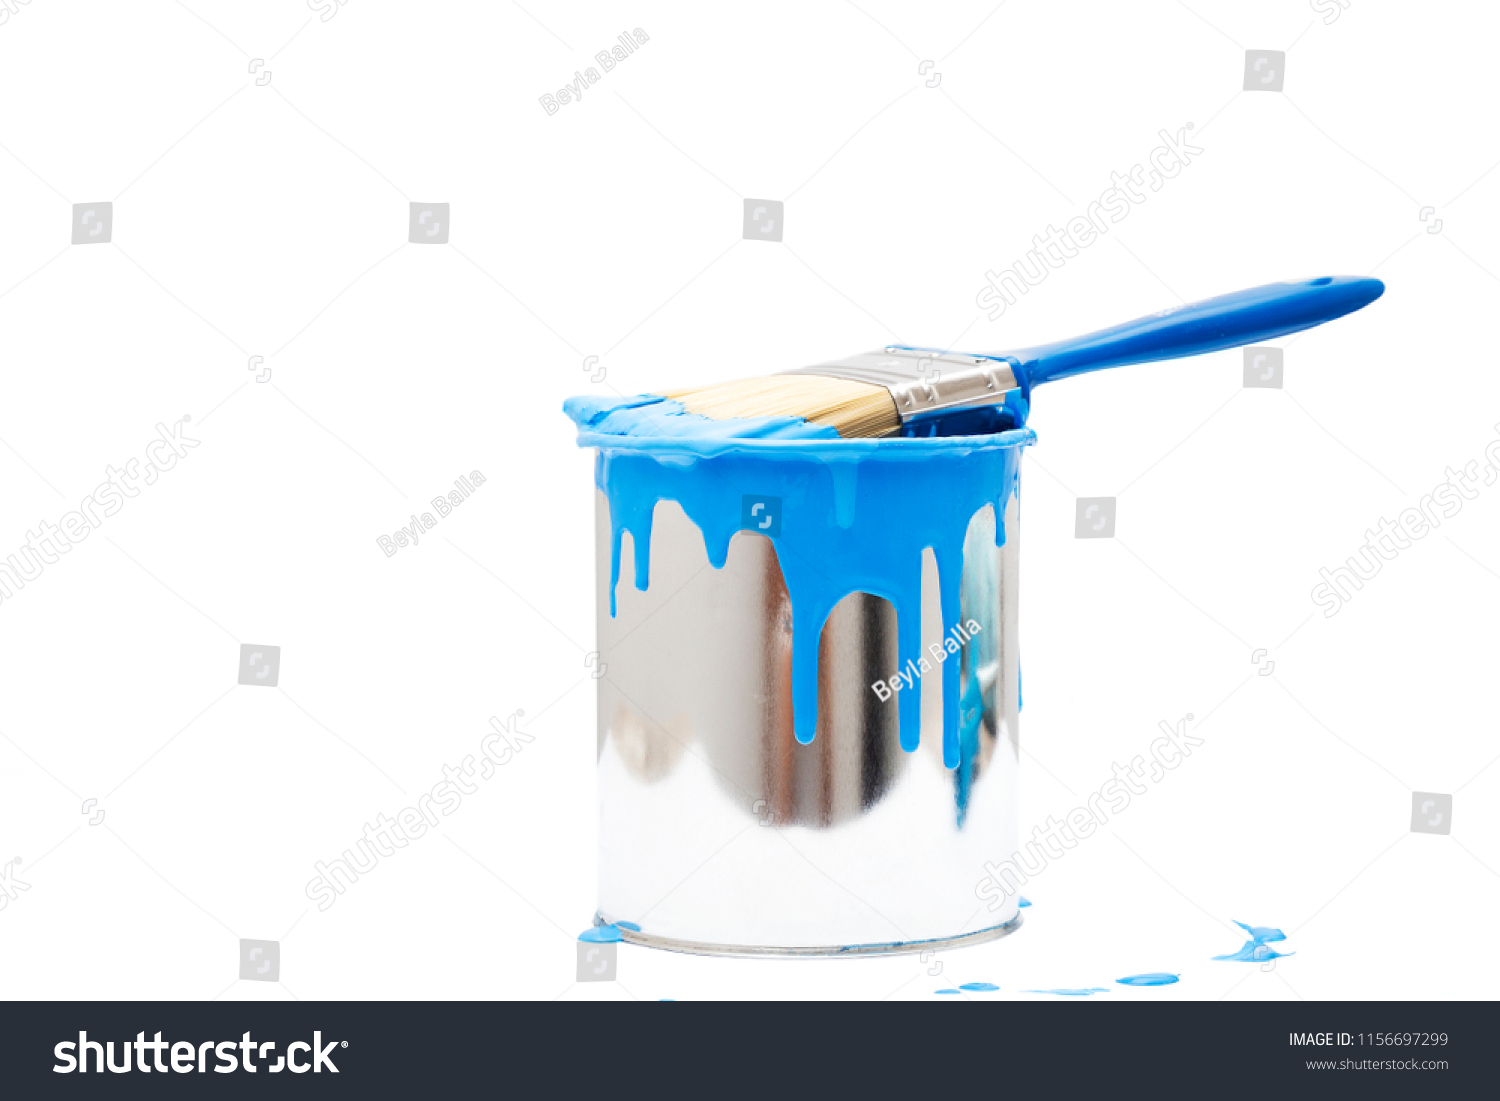 open, painted bucket and paintbrush on a white backdrop. #1156697299